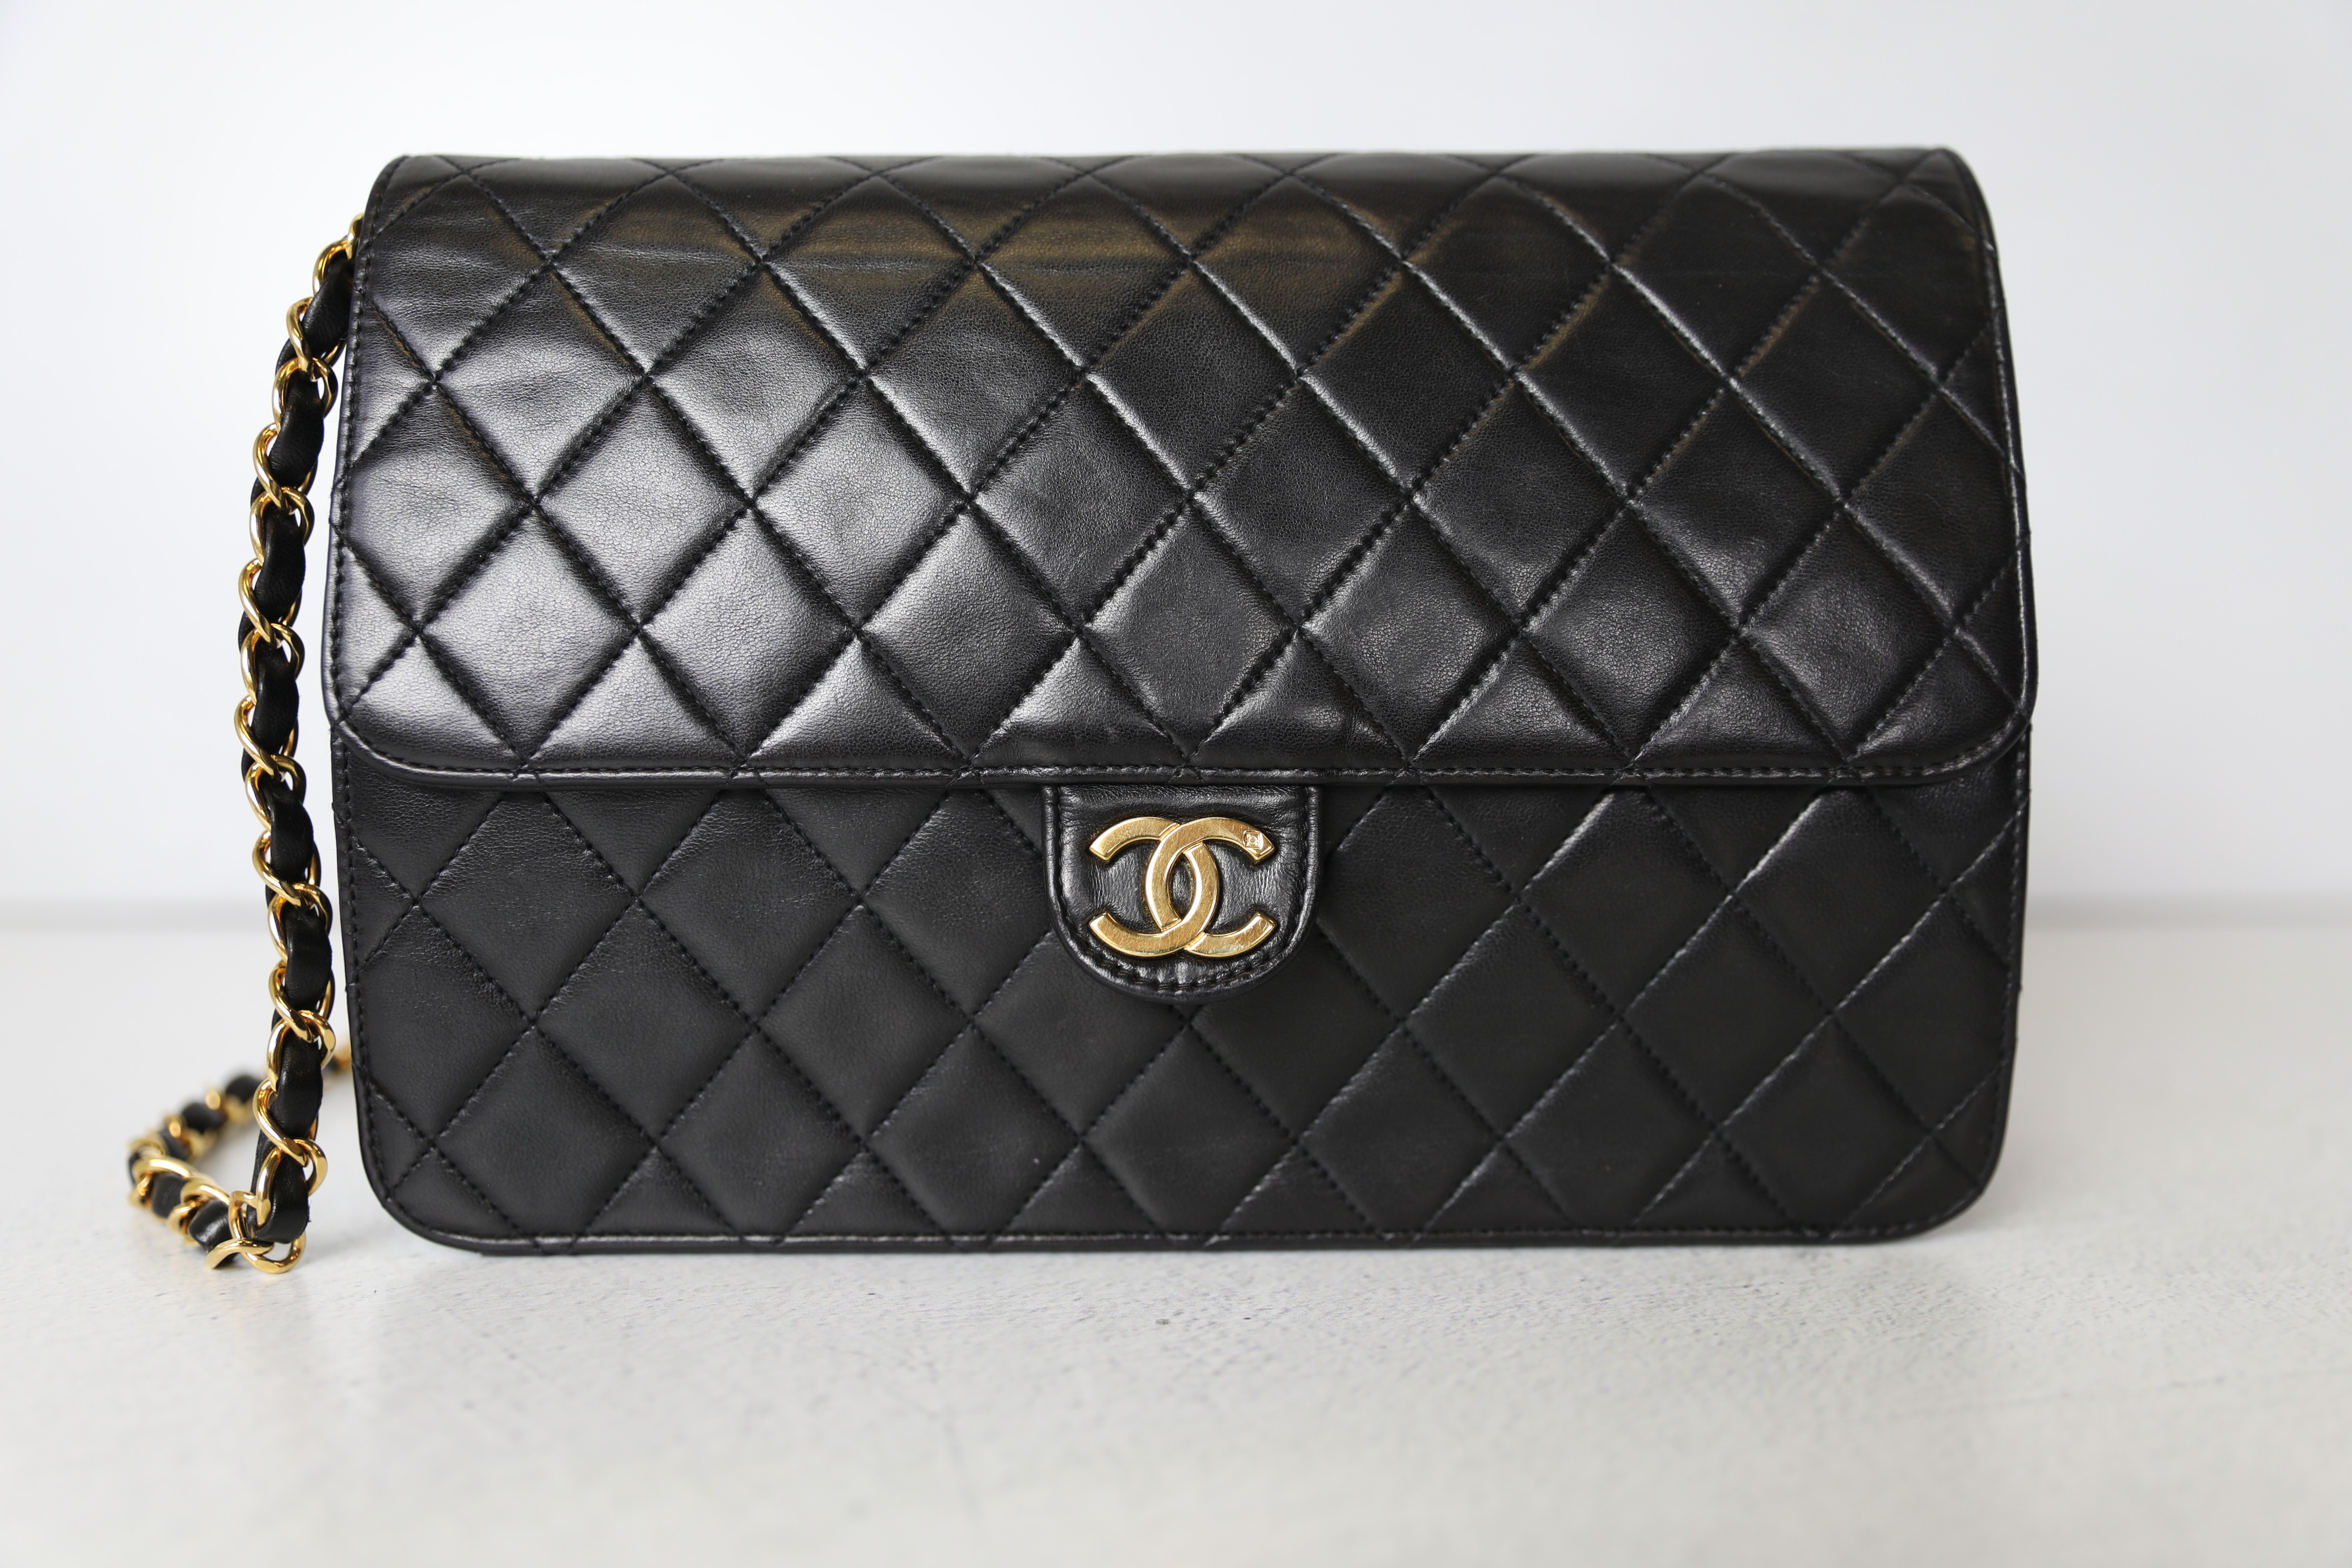 Chanel Classic Medium Black And White Tweed Ribbon With Gold